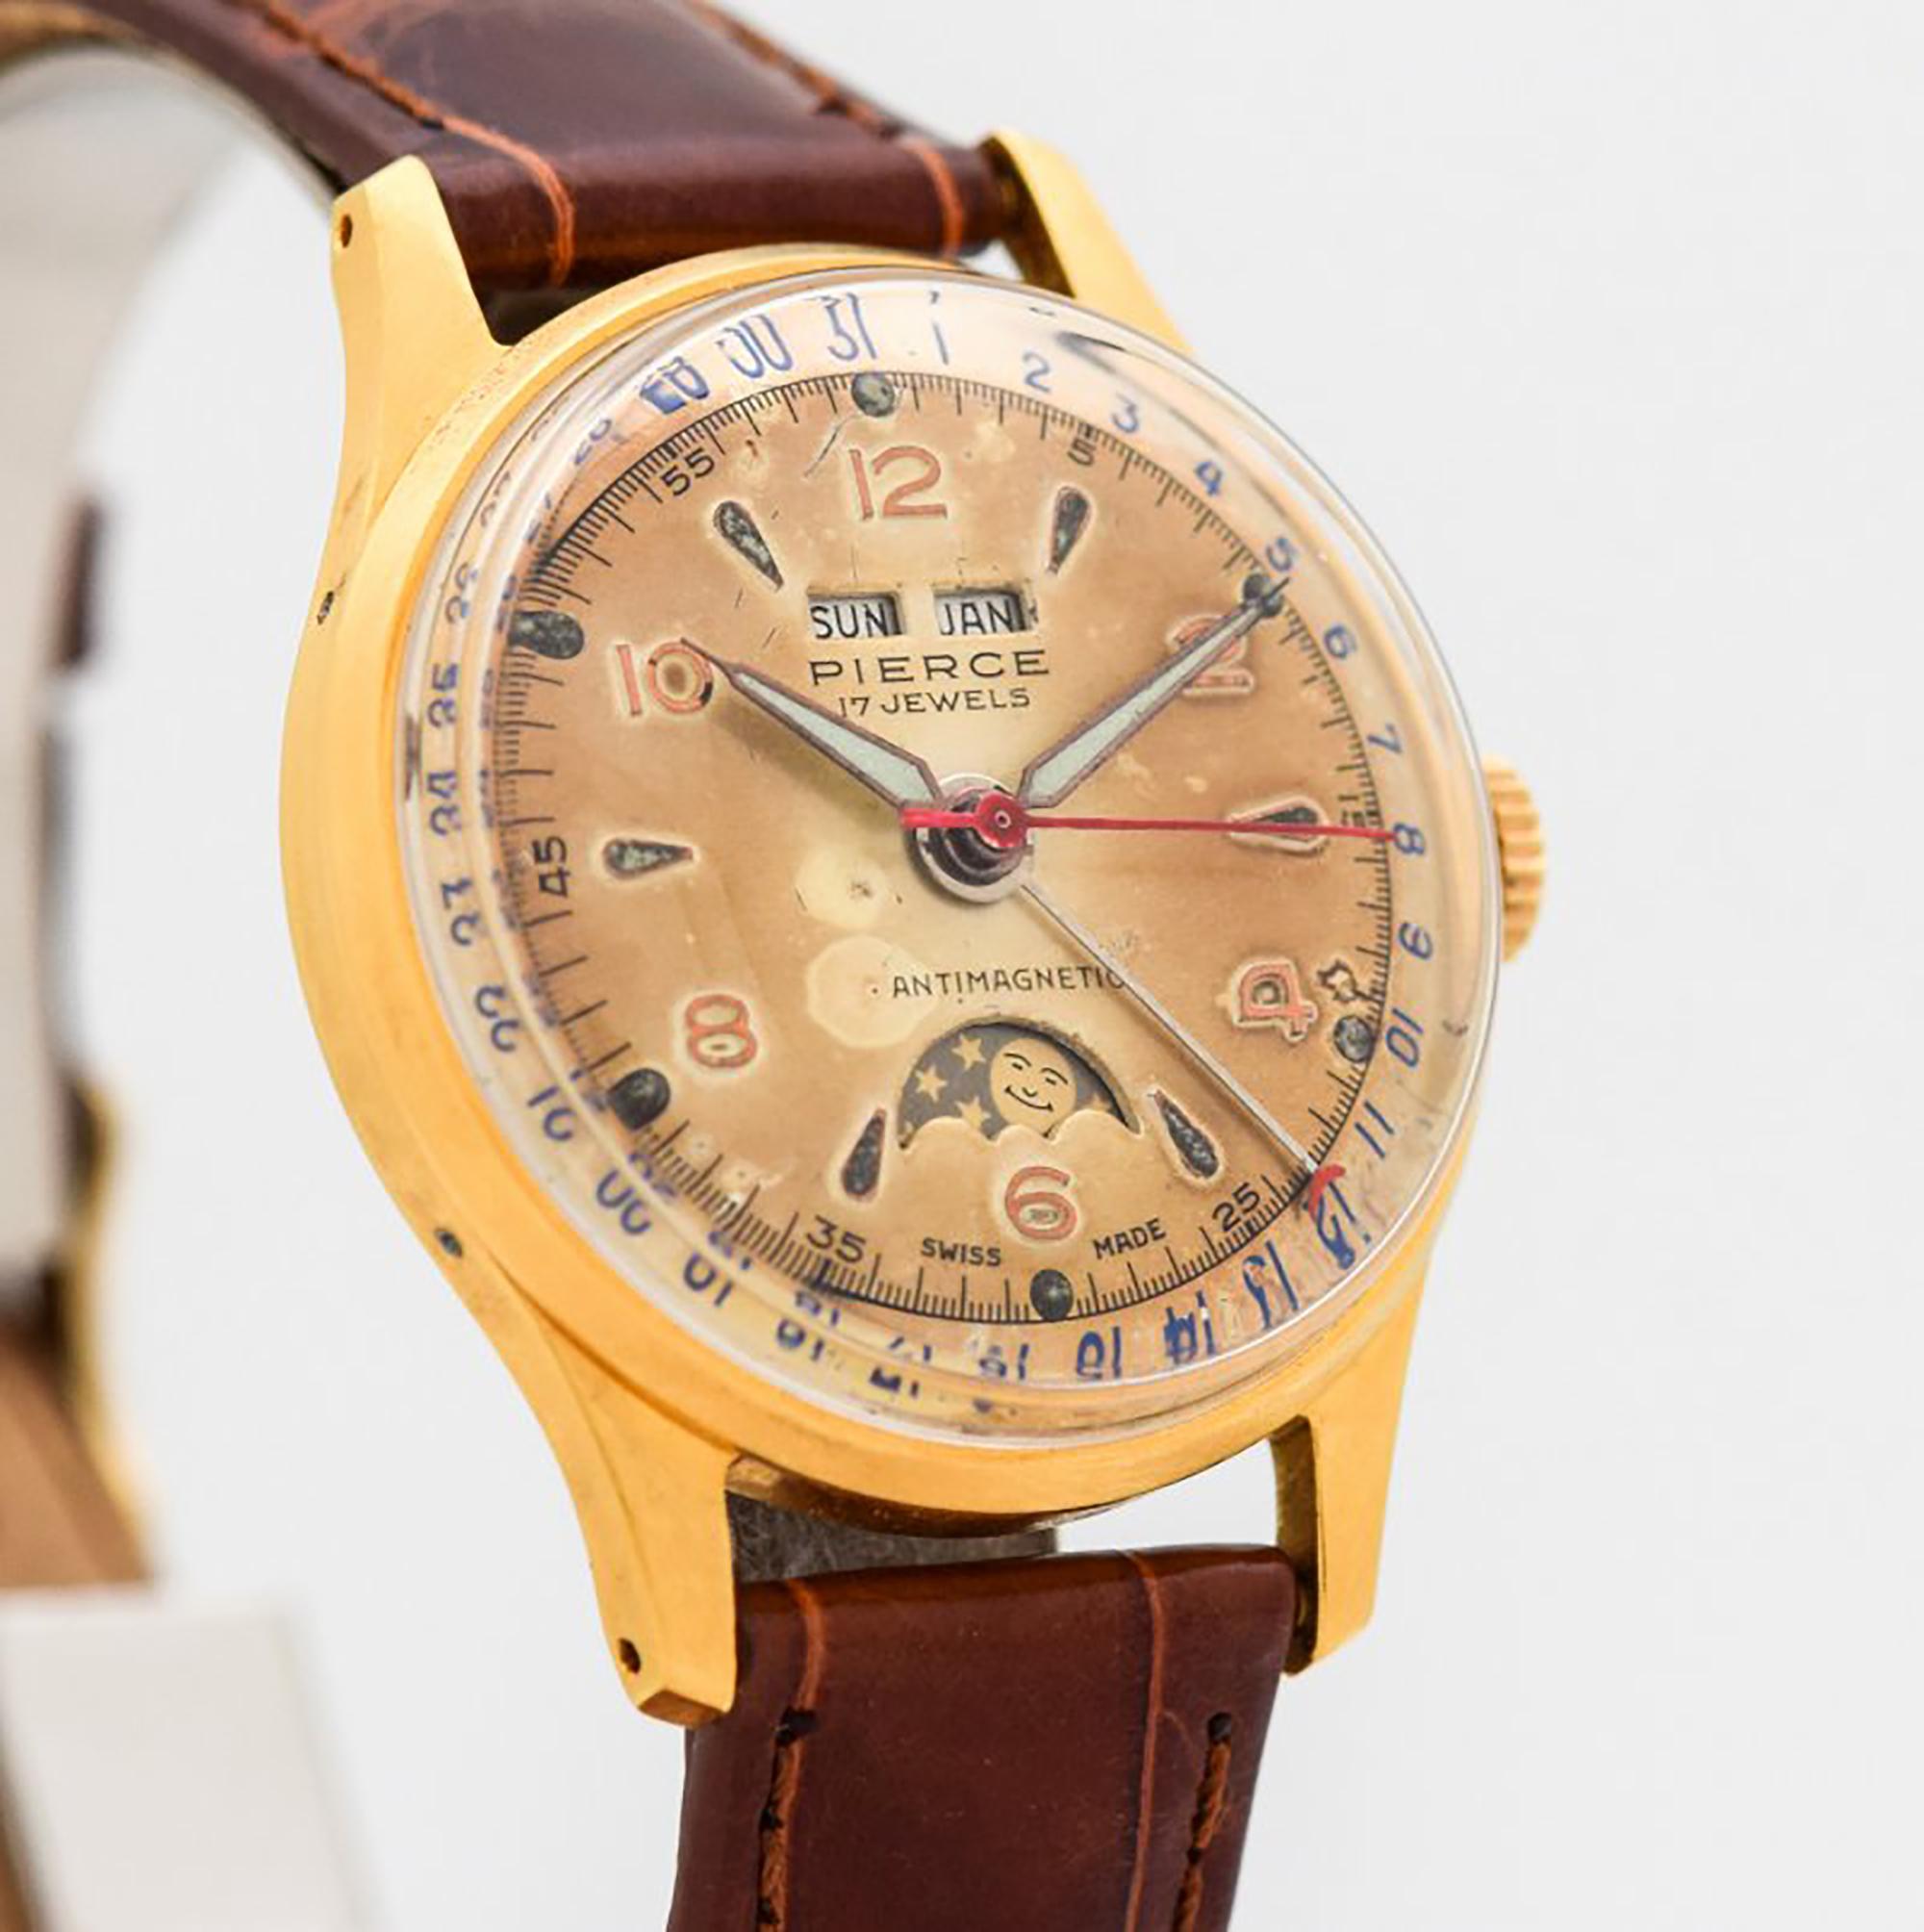 1950's Vintage Pierce Calendar Triple Date (Month, Day, and Date) Moon-Phase 14k Yellow Gold Plated with Stainless Steel Case Back watch with Original Gold Caramelized Patina Dial with Raised Gold Arabic and Elongated Arrow Markers. 32mm x 40mm lug